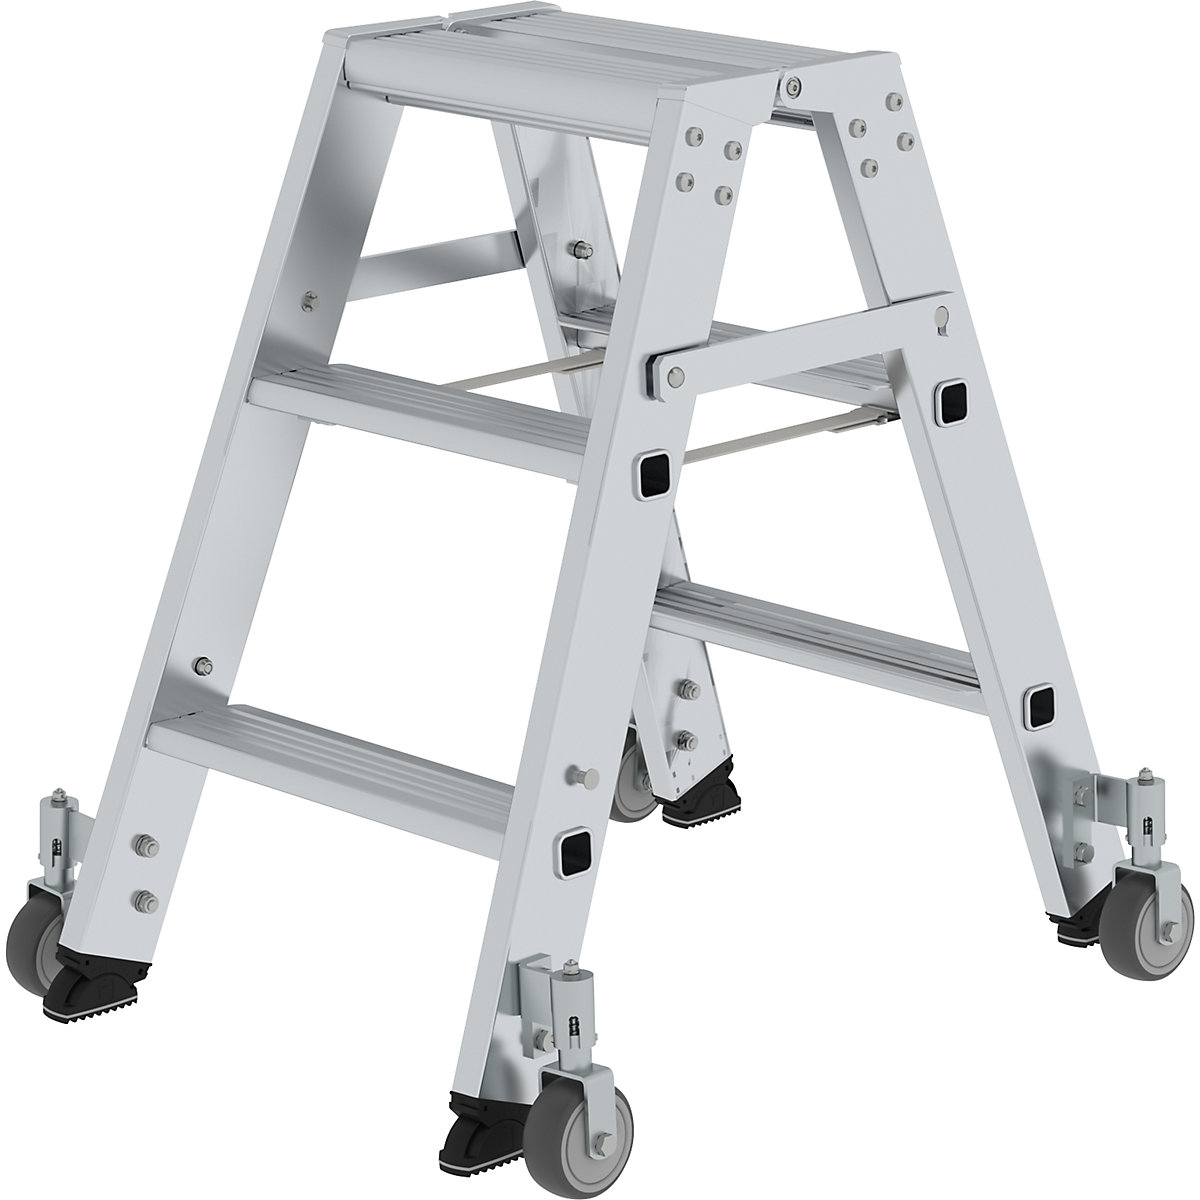 Step ladder, double sided – MUNK